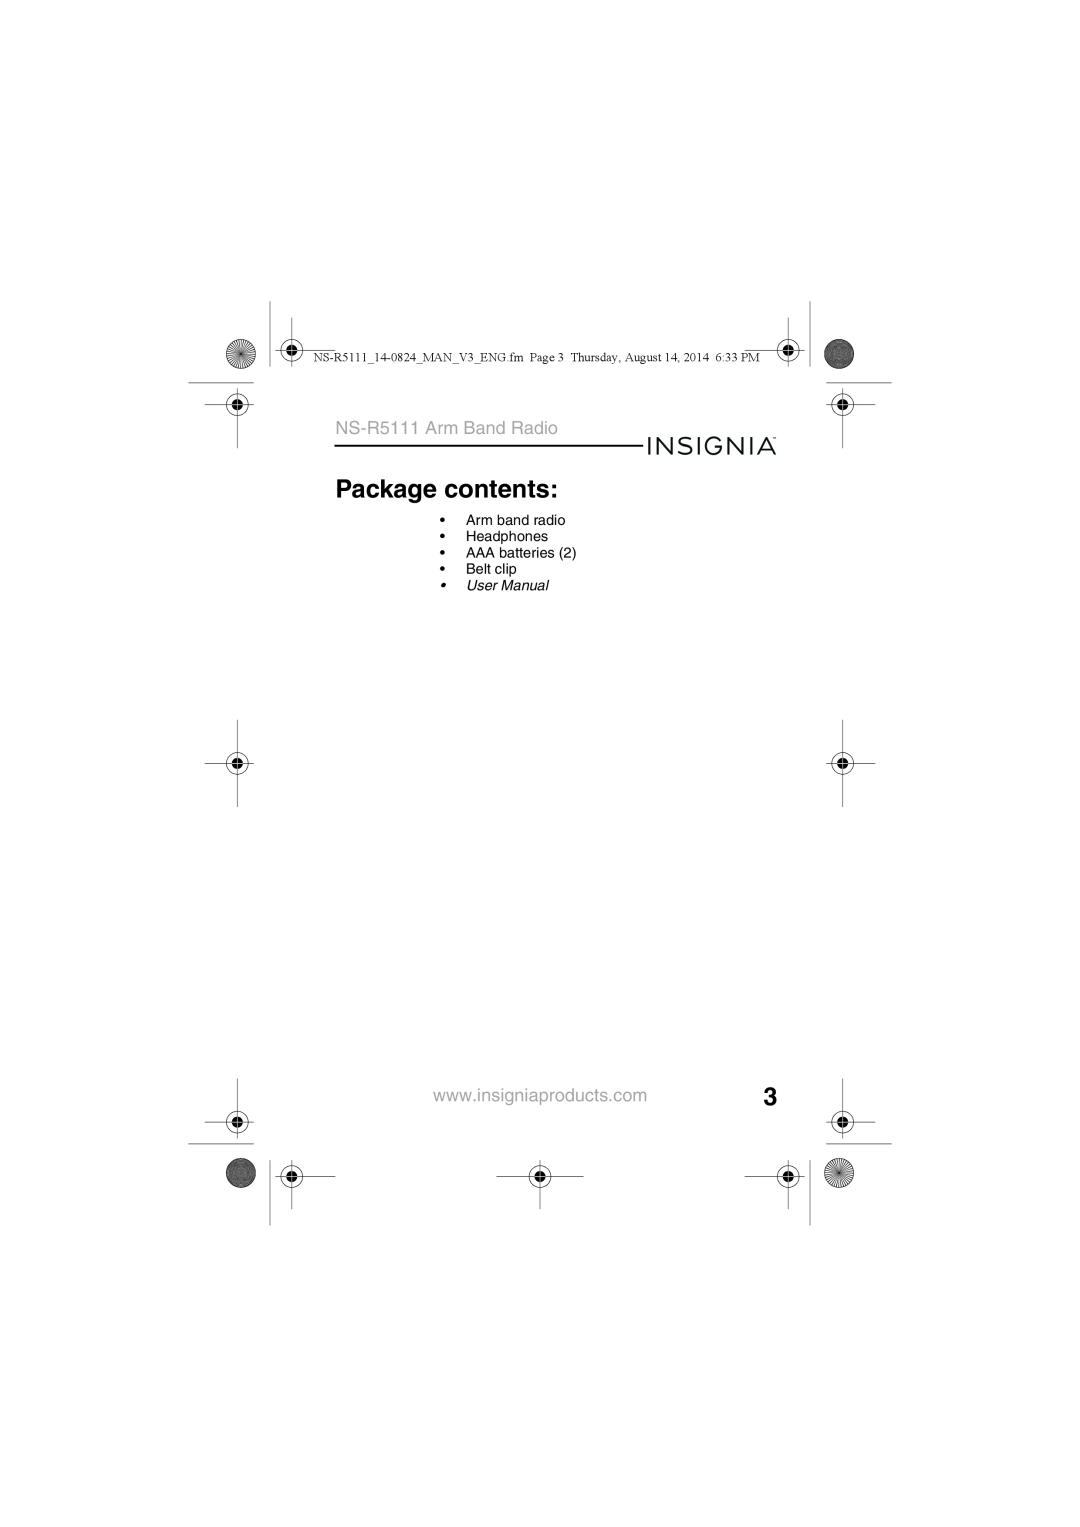 Insignia manual Package contents, NS-R5111Arm Band Radio 